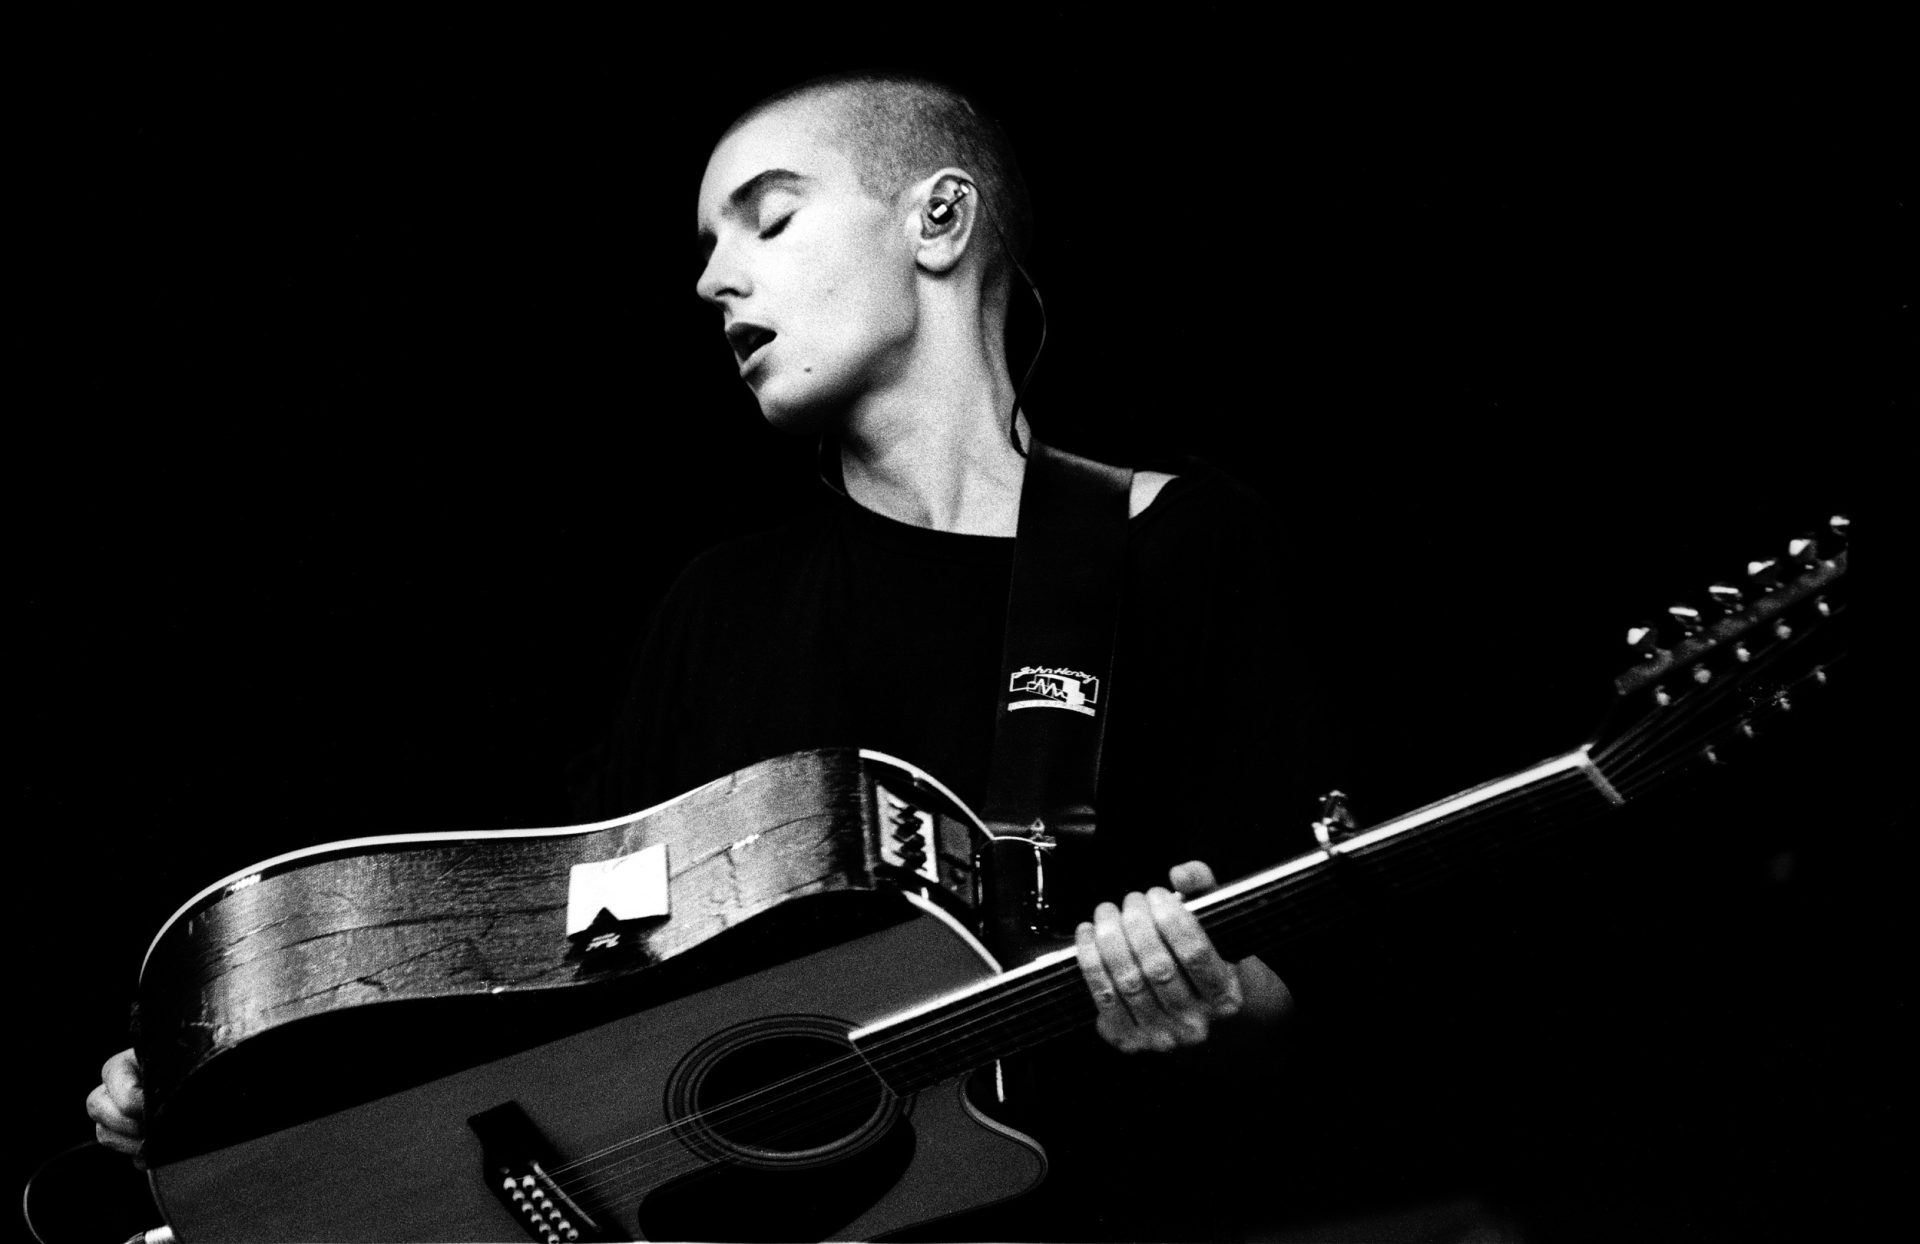 Flashback: Sinéad O'Connor covers Nirvana's "All Apologies" in 1995